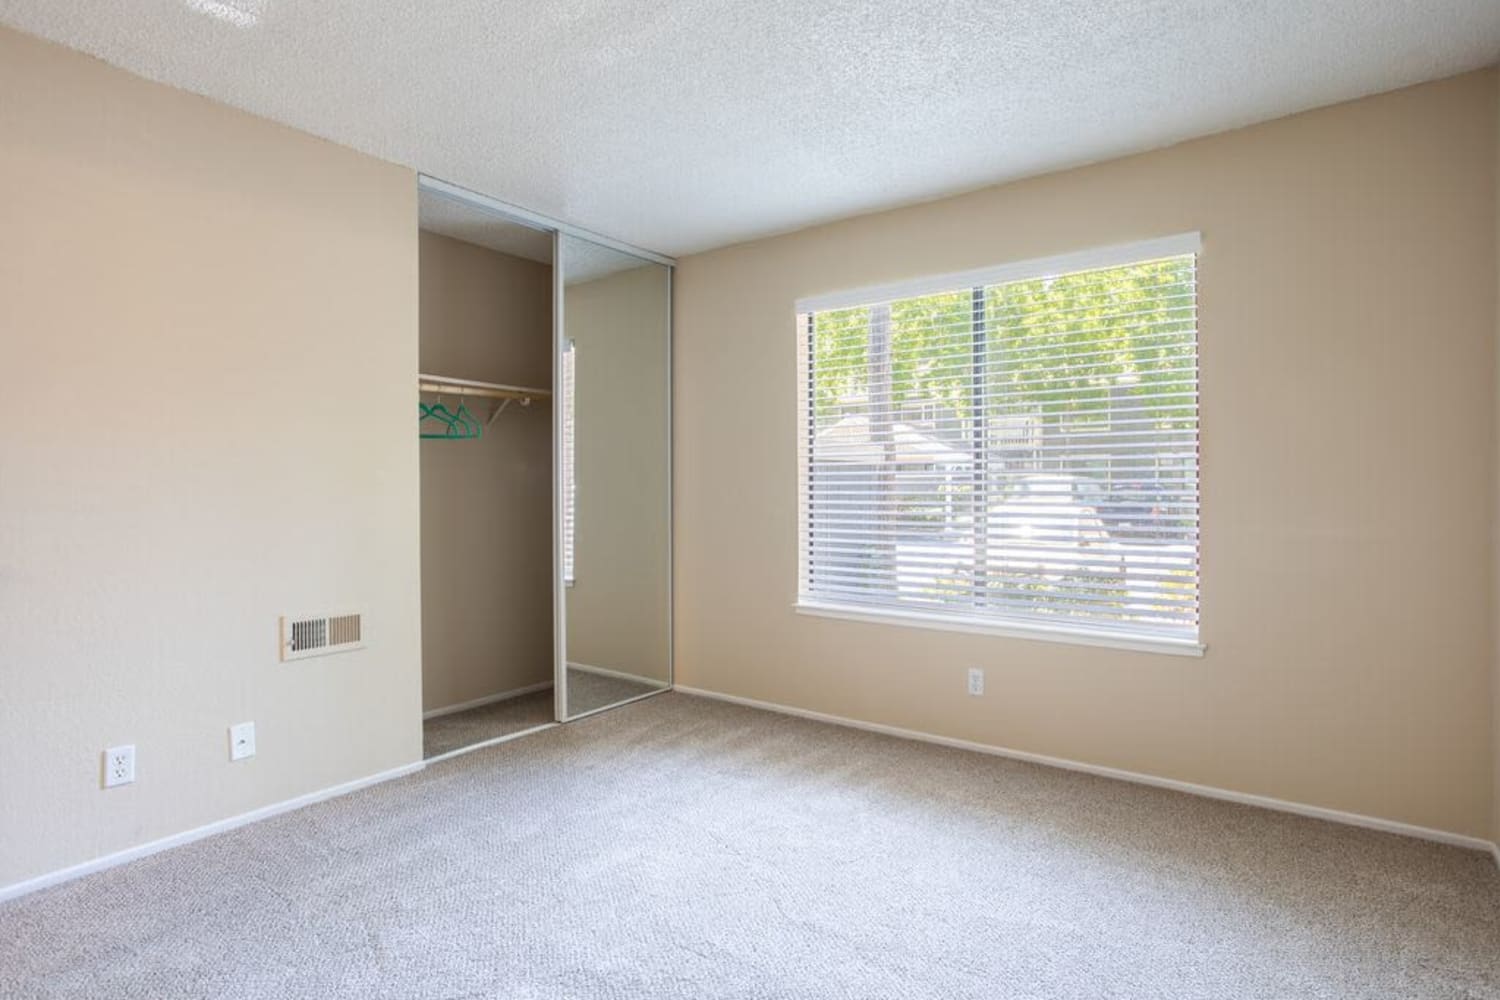 Second bedroom at Amber Court in Fremont, California